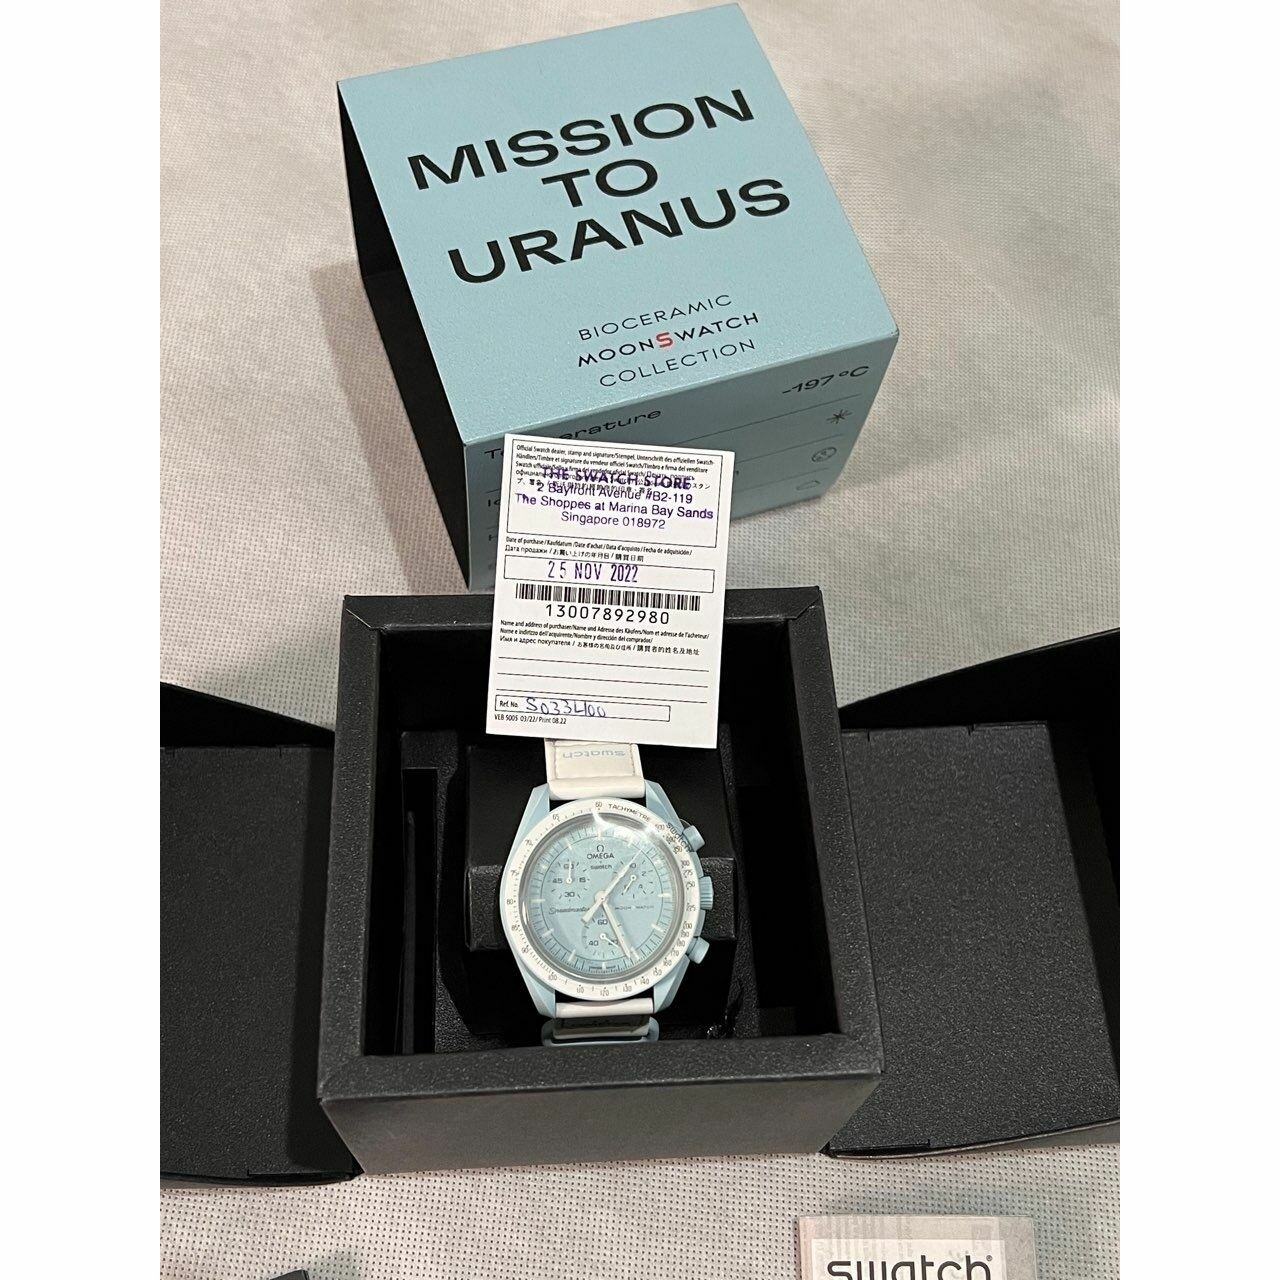 OMEGA SWATCH MISSION TO URANUS BIOCERAMIC MOONS WATCH COLLECTION 